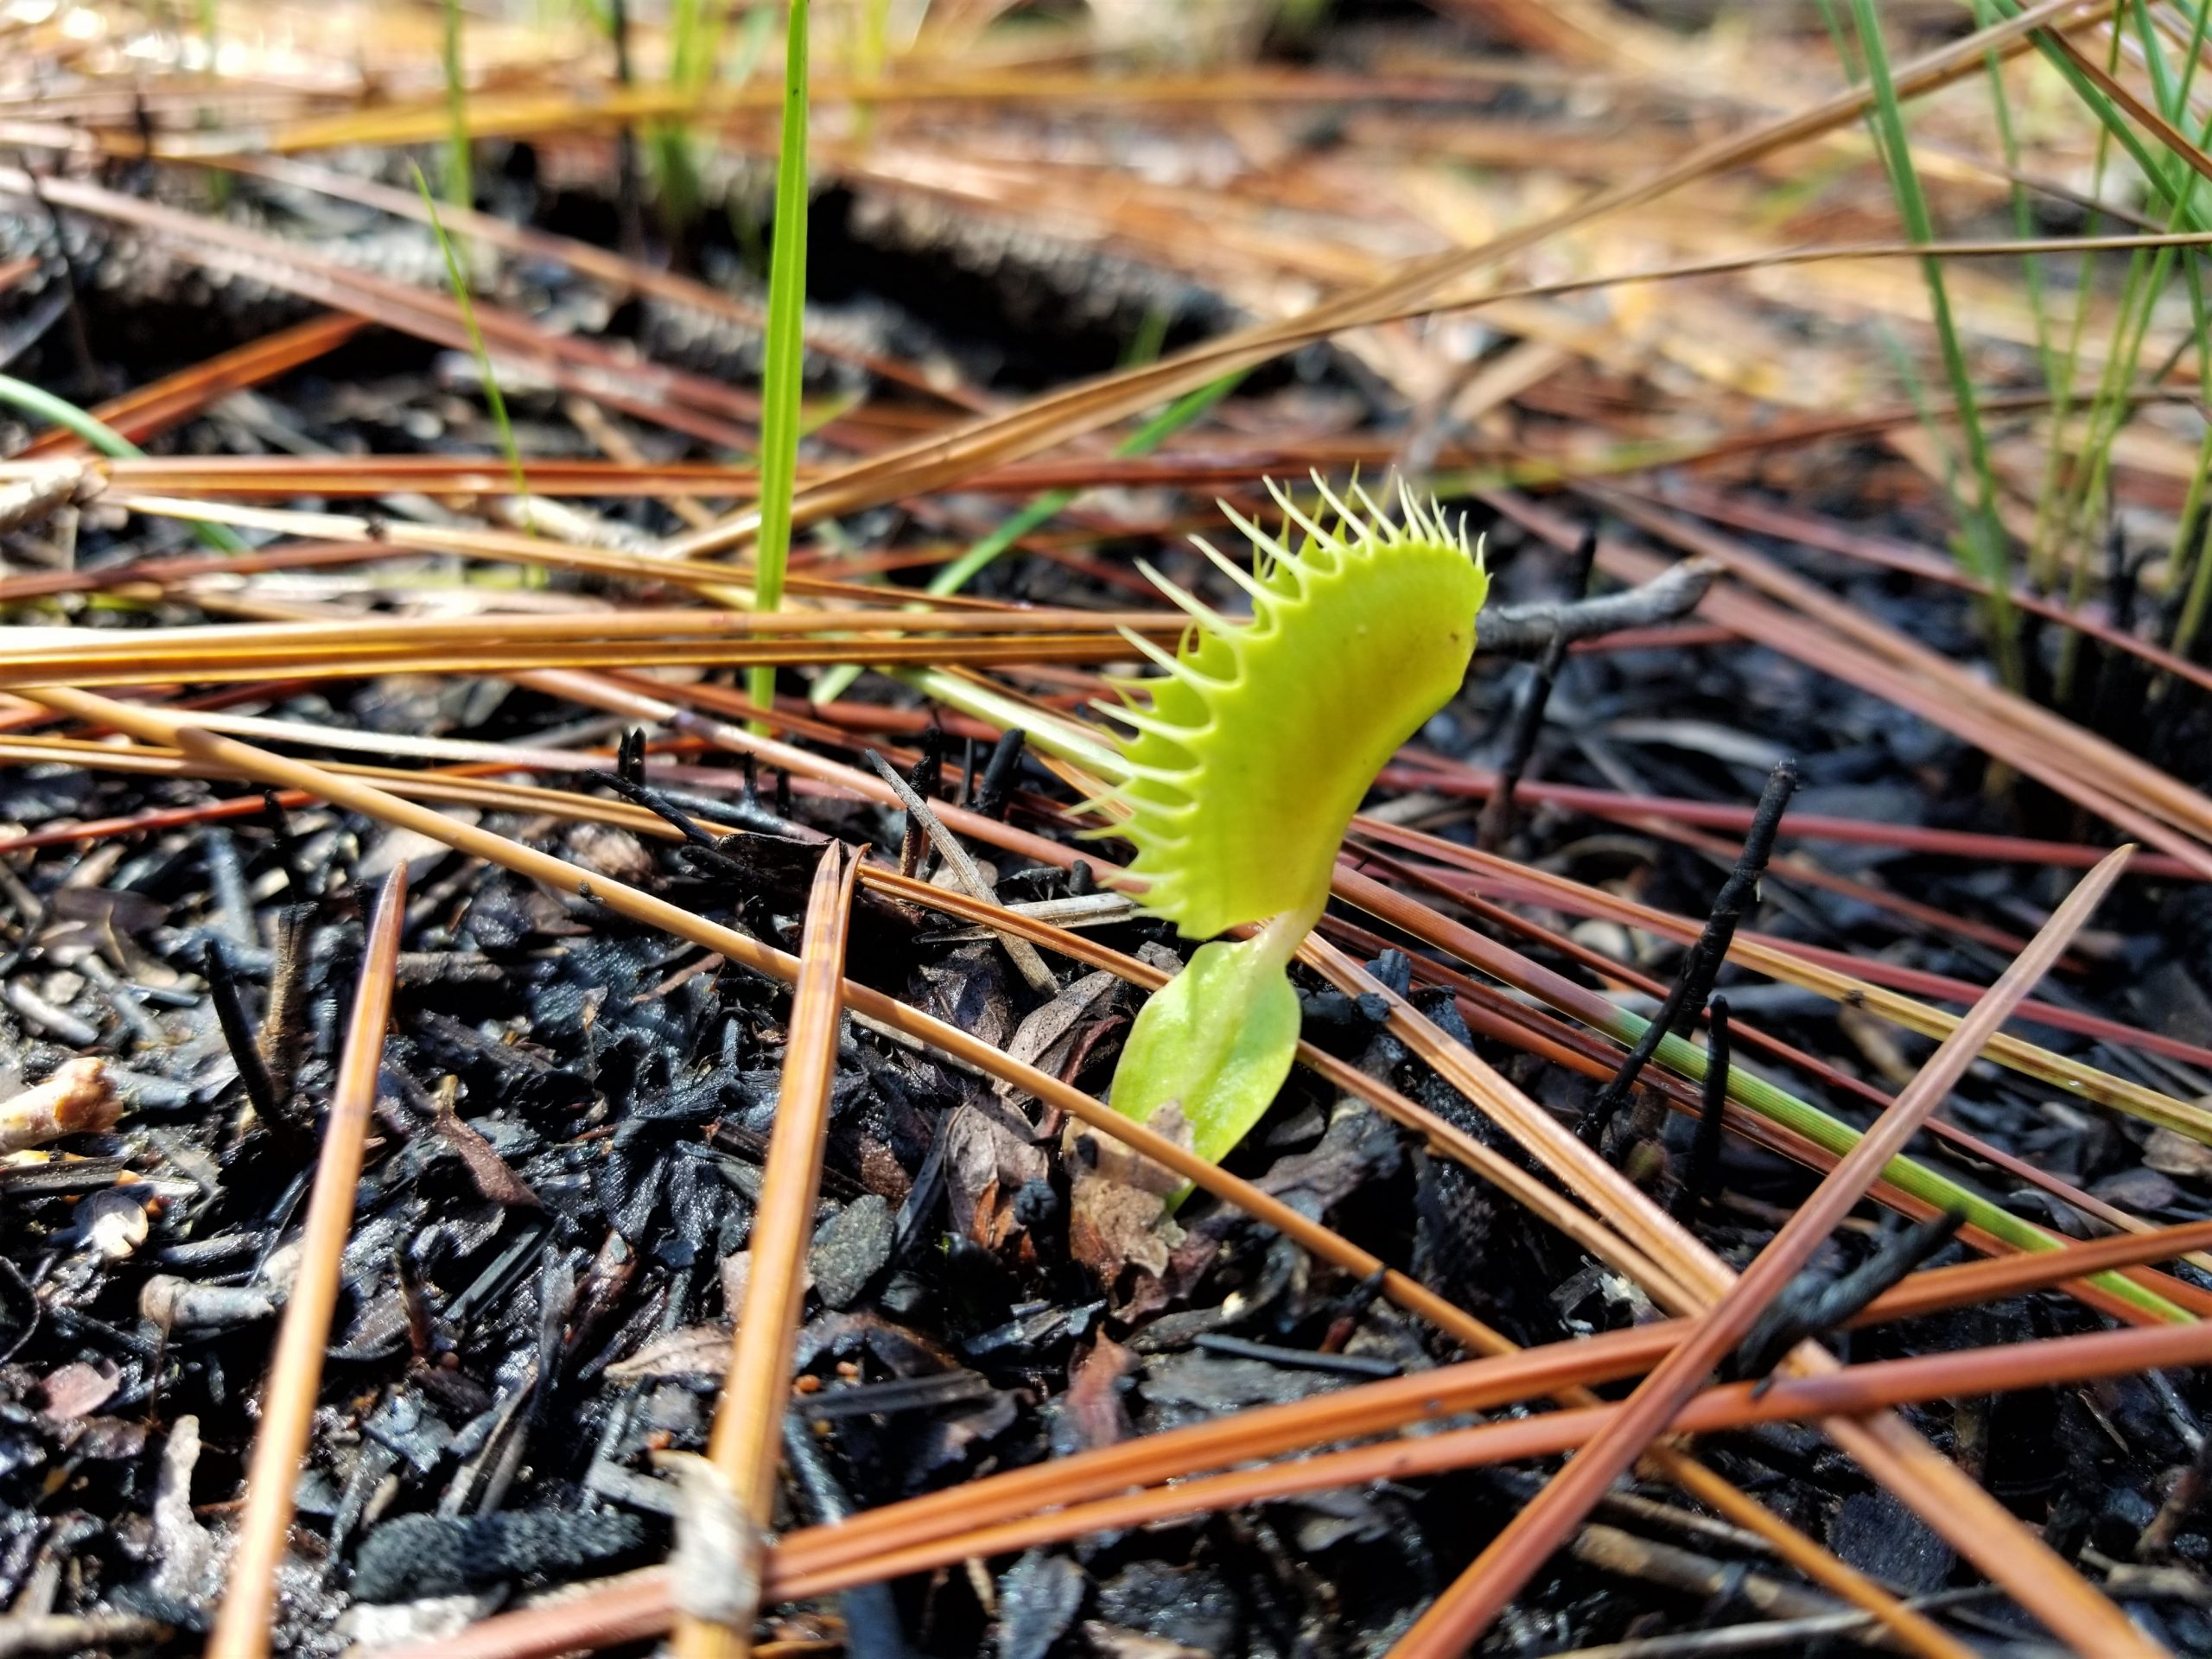 Venus flytrap from the ashes. Photo by Johnny Randall, courtesy of the North Carolina Botanical Garden.